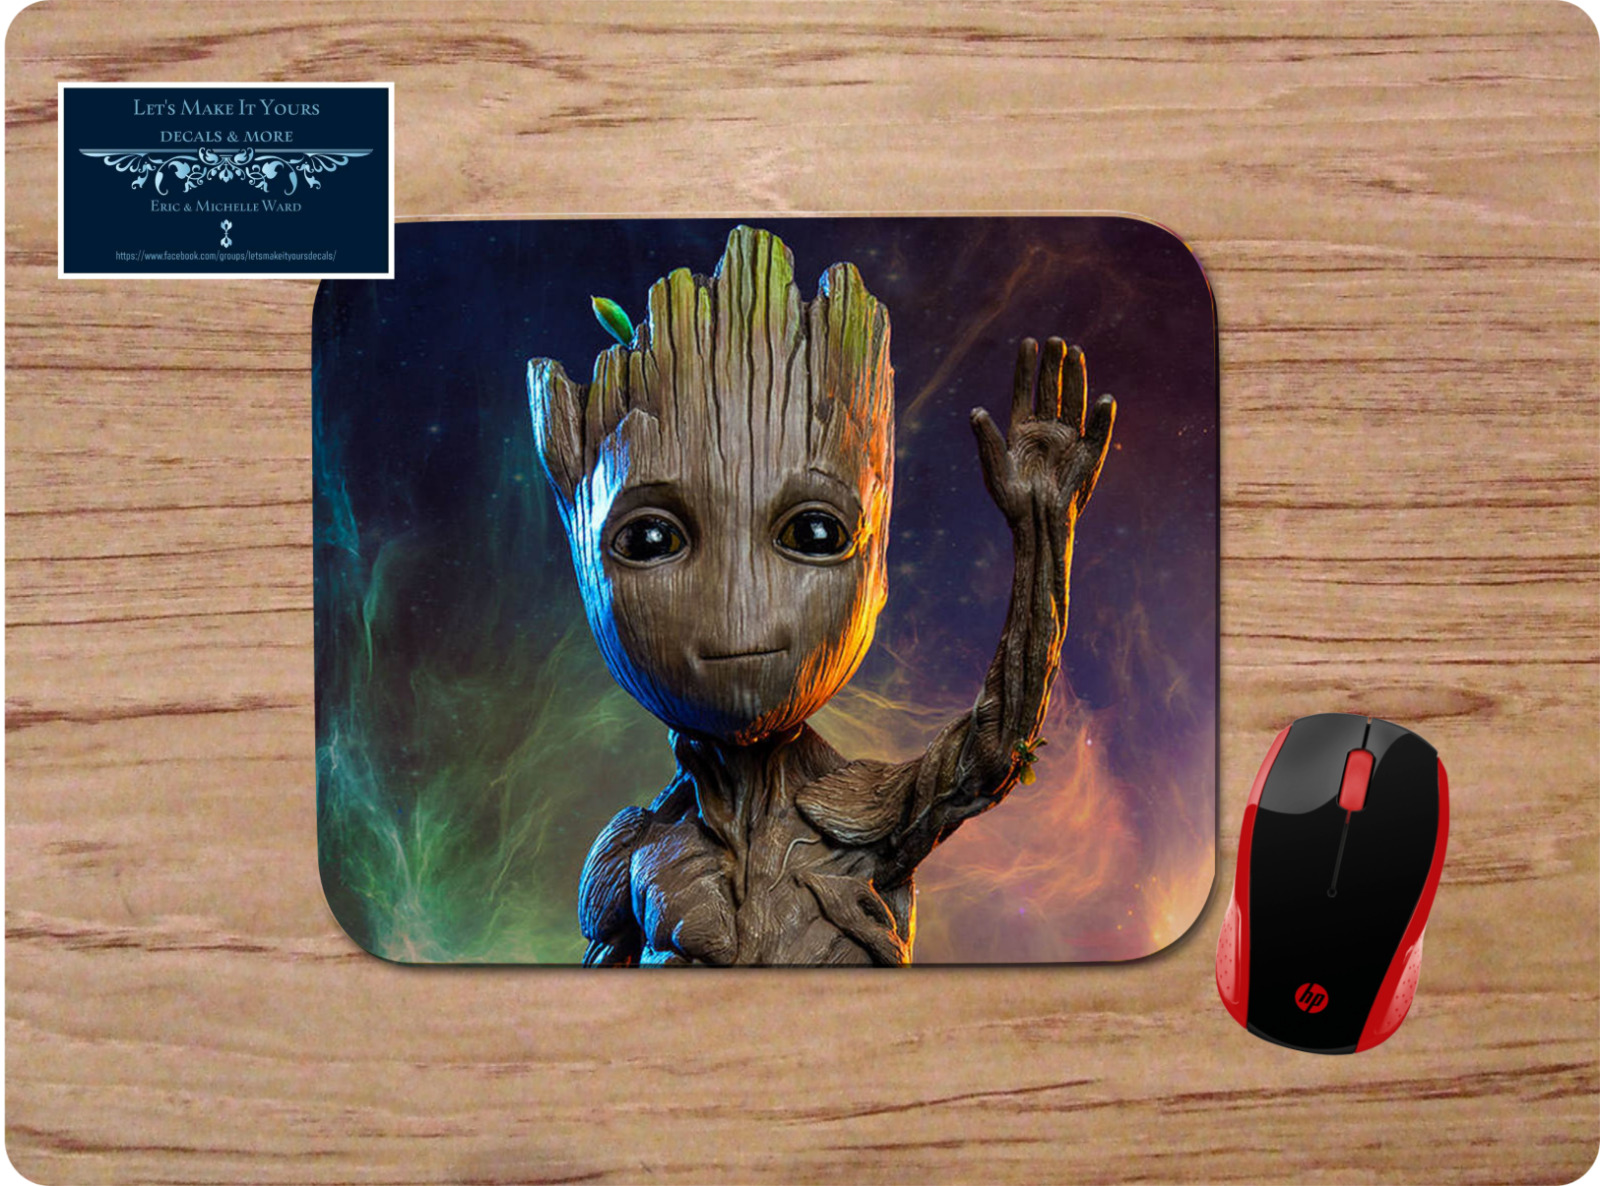 BABY GROOT GUARDIANS OF THE GALAXY INSPIRED MOUSE PAD DESK MAT CUSTOM MADE USA